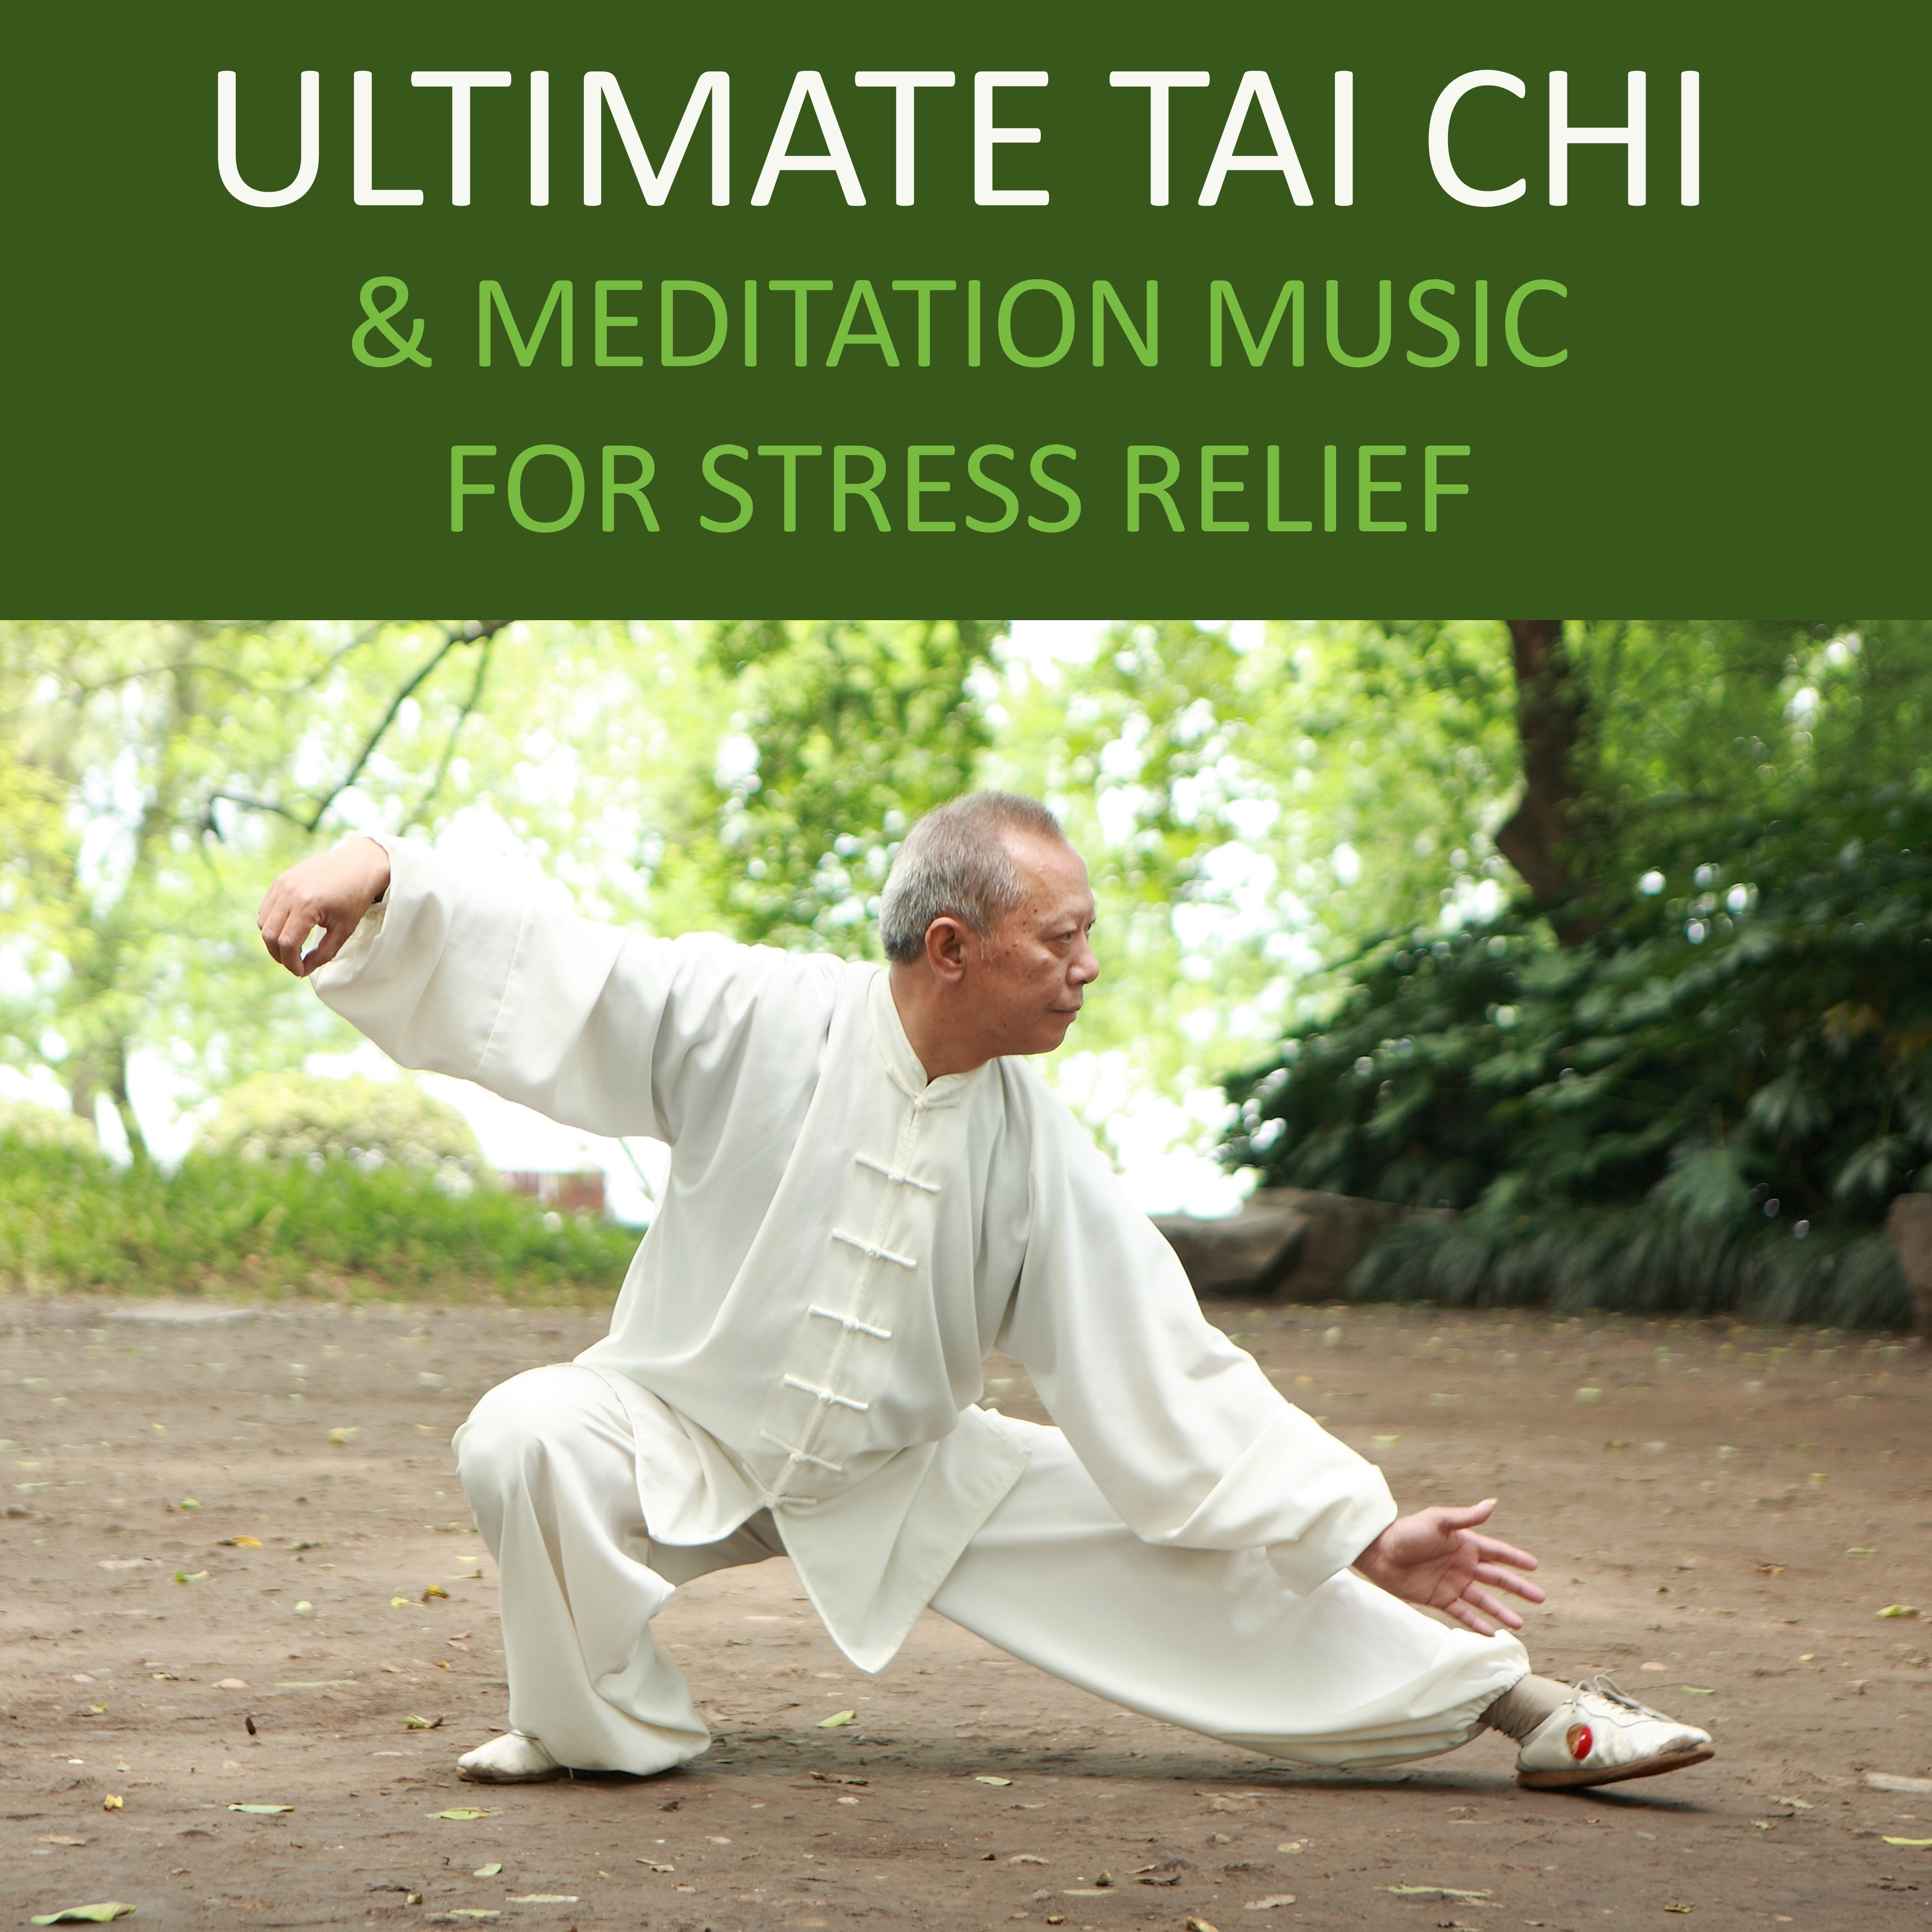 Ultimate Tai Chi & Meditation Music for Stress Relief